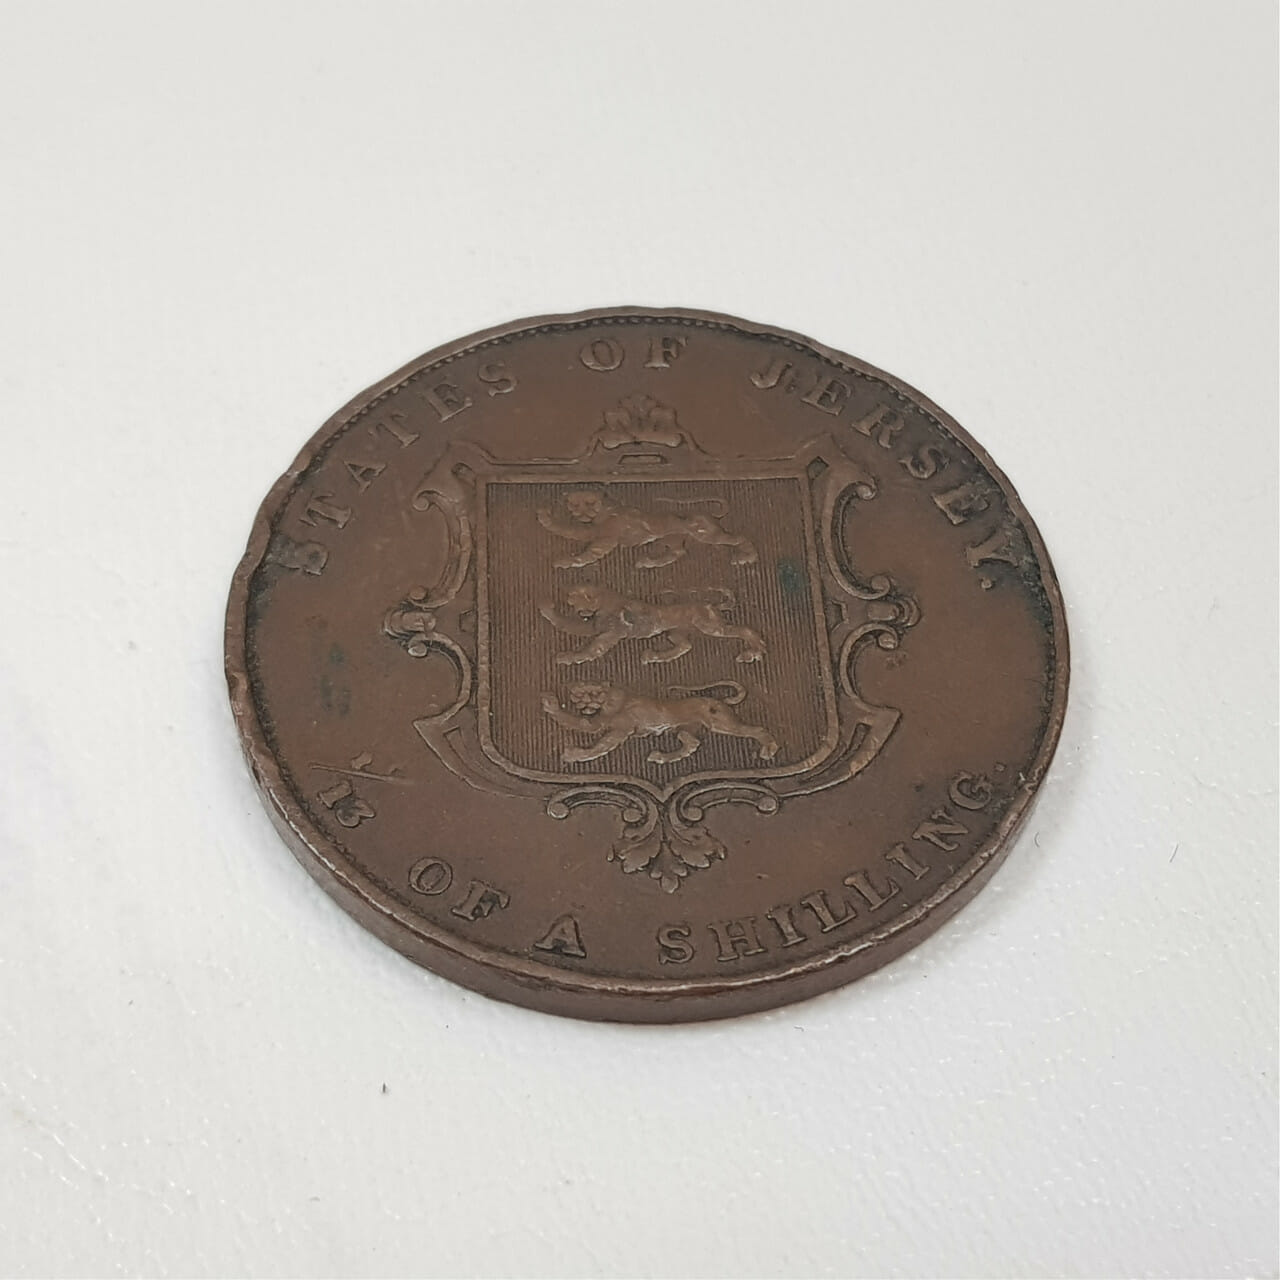 1844 1/13th of A Shilling States of Jersey Victoria Copper Coin #43884-2